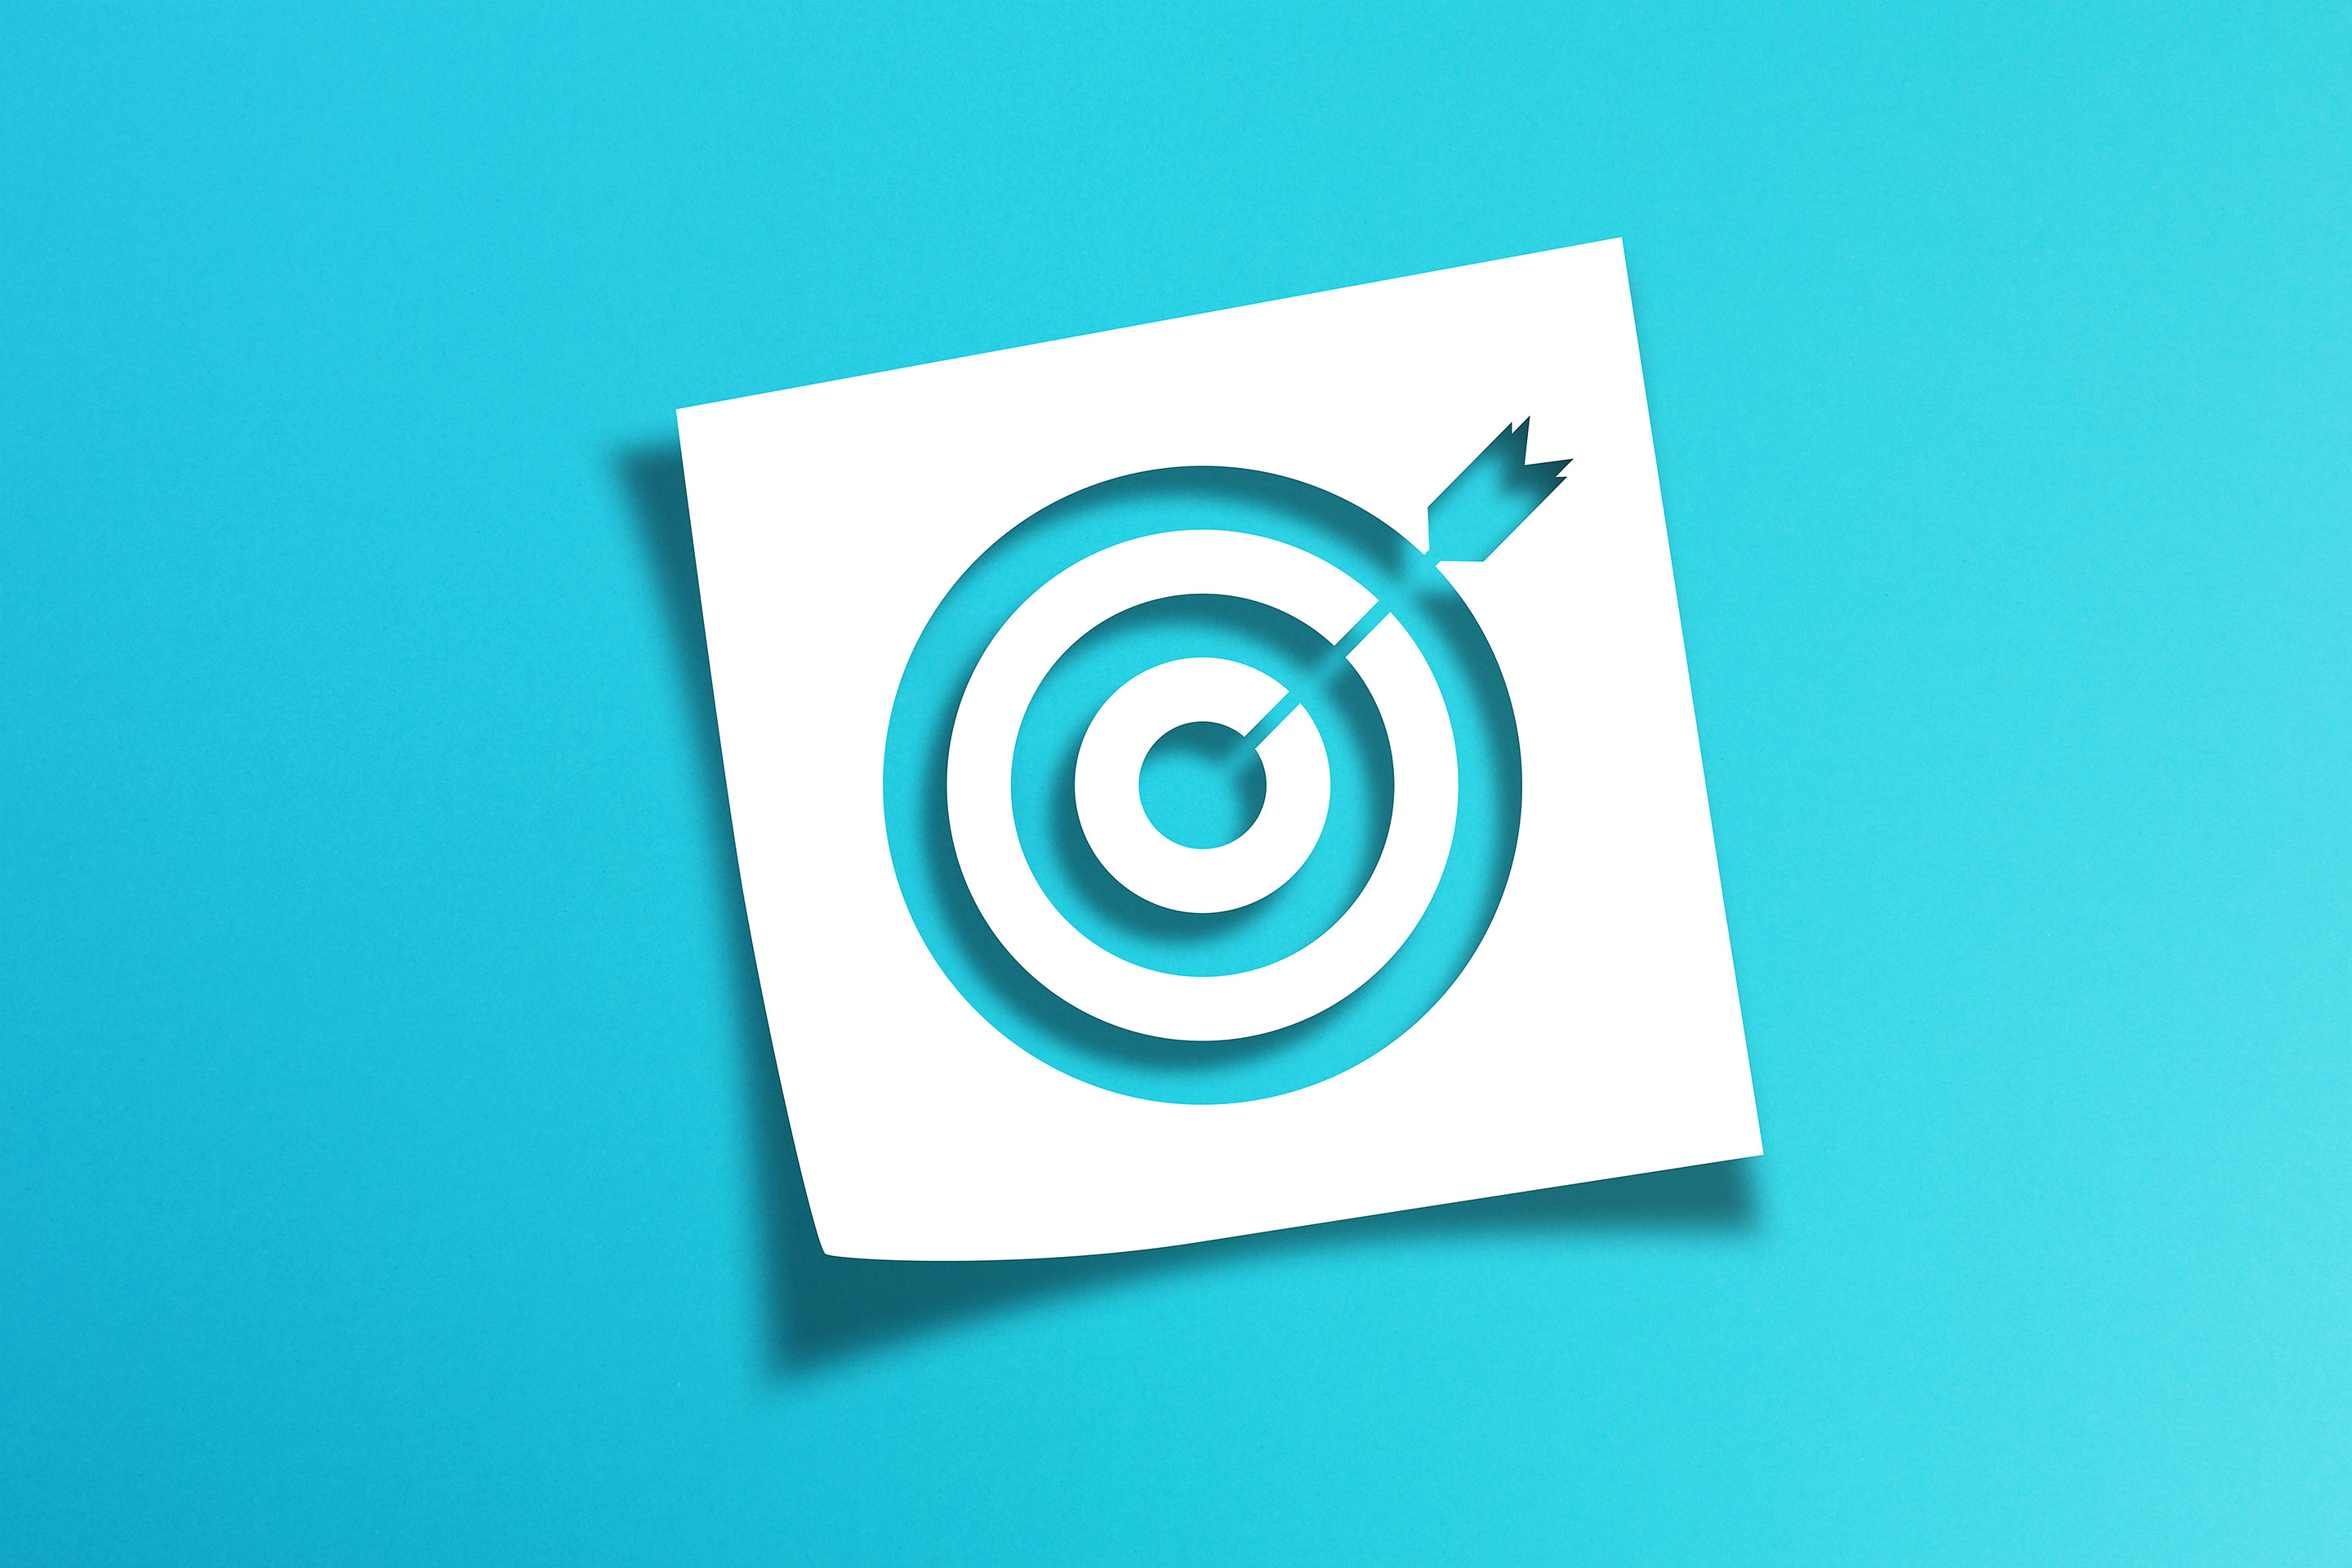 Image of a target on a vibrant blue background as a metaphor for investing goals